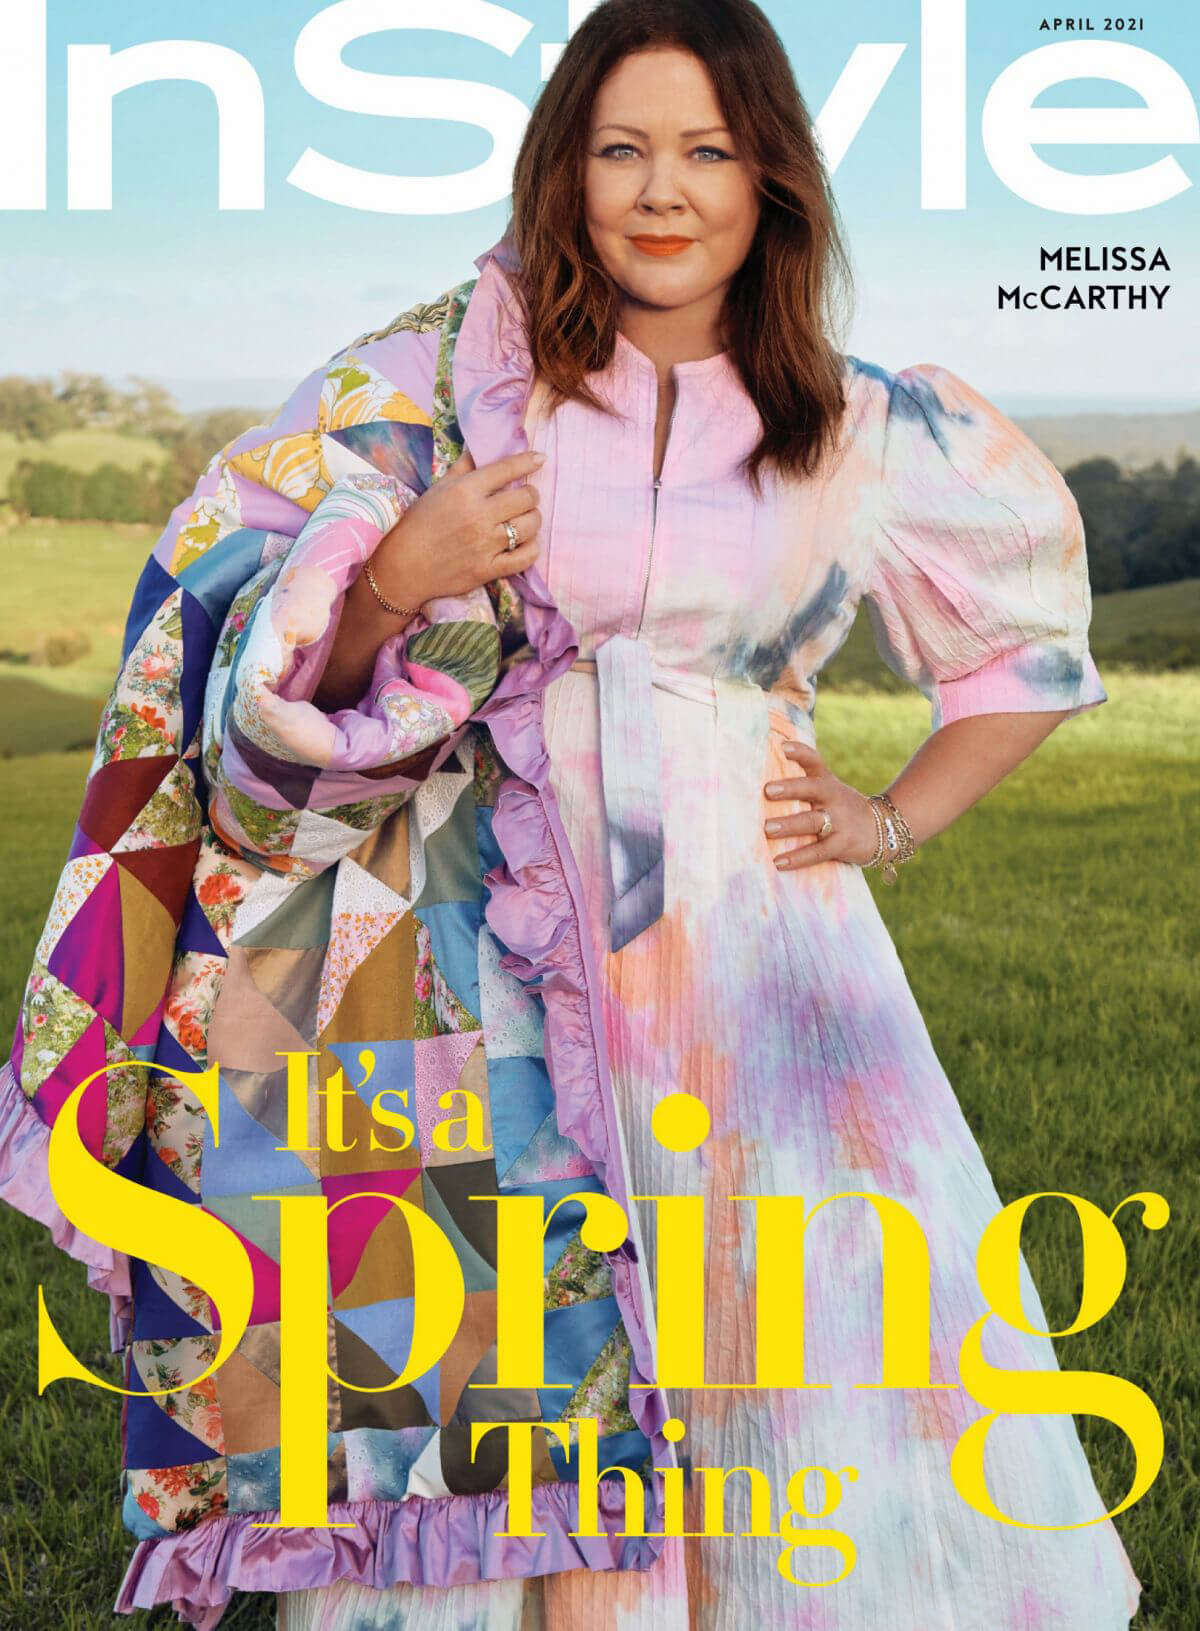 Melissa McCarthy On The Cover Page Of Instyle Magazine, April 2021